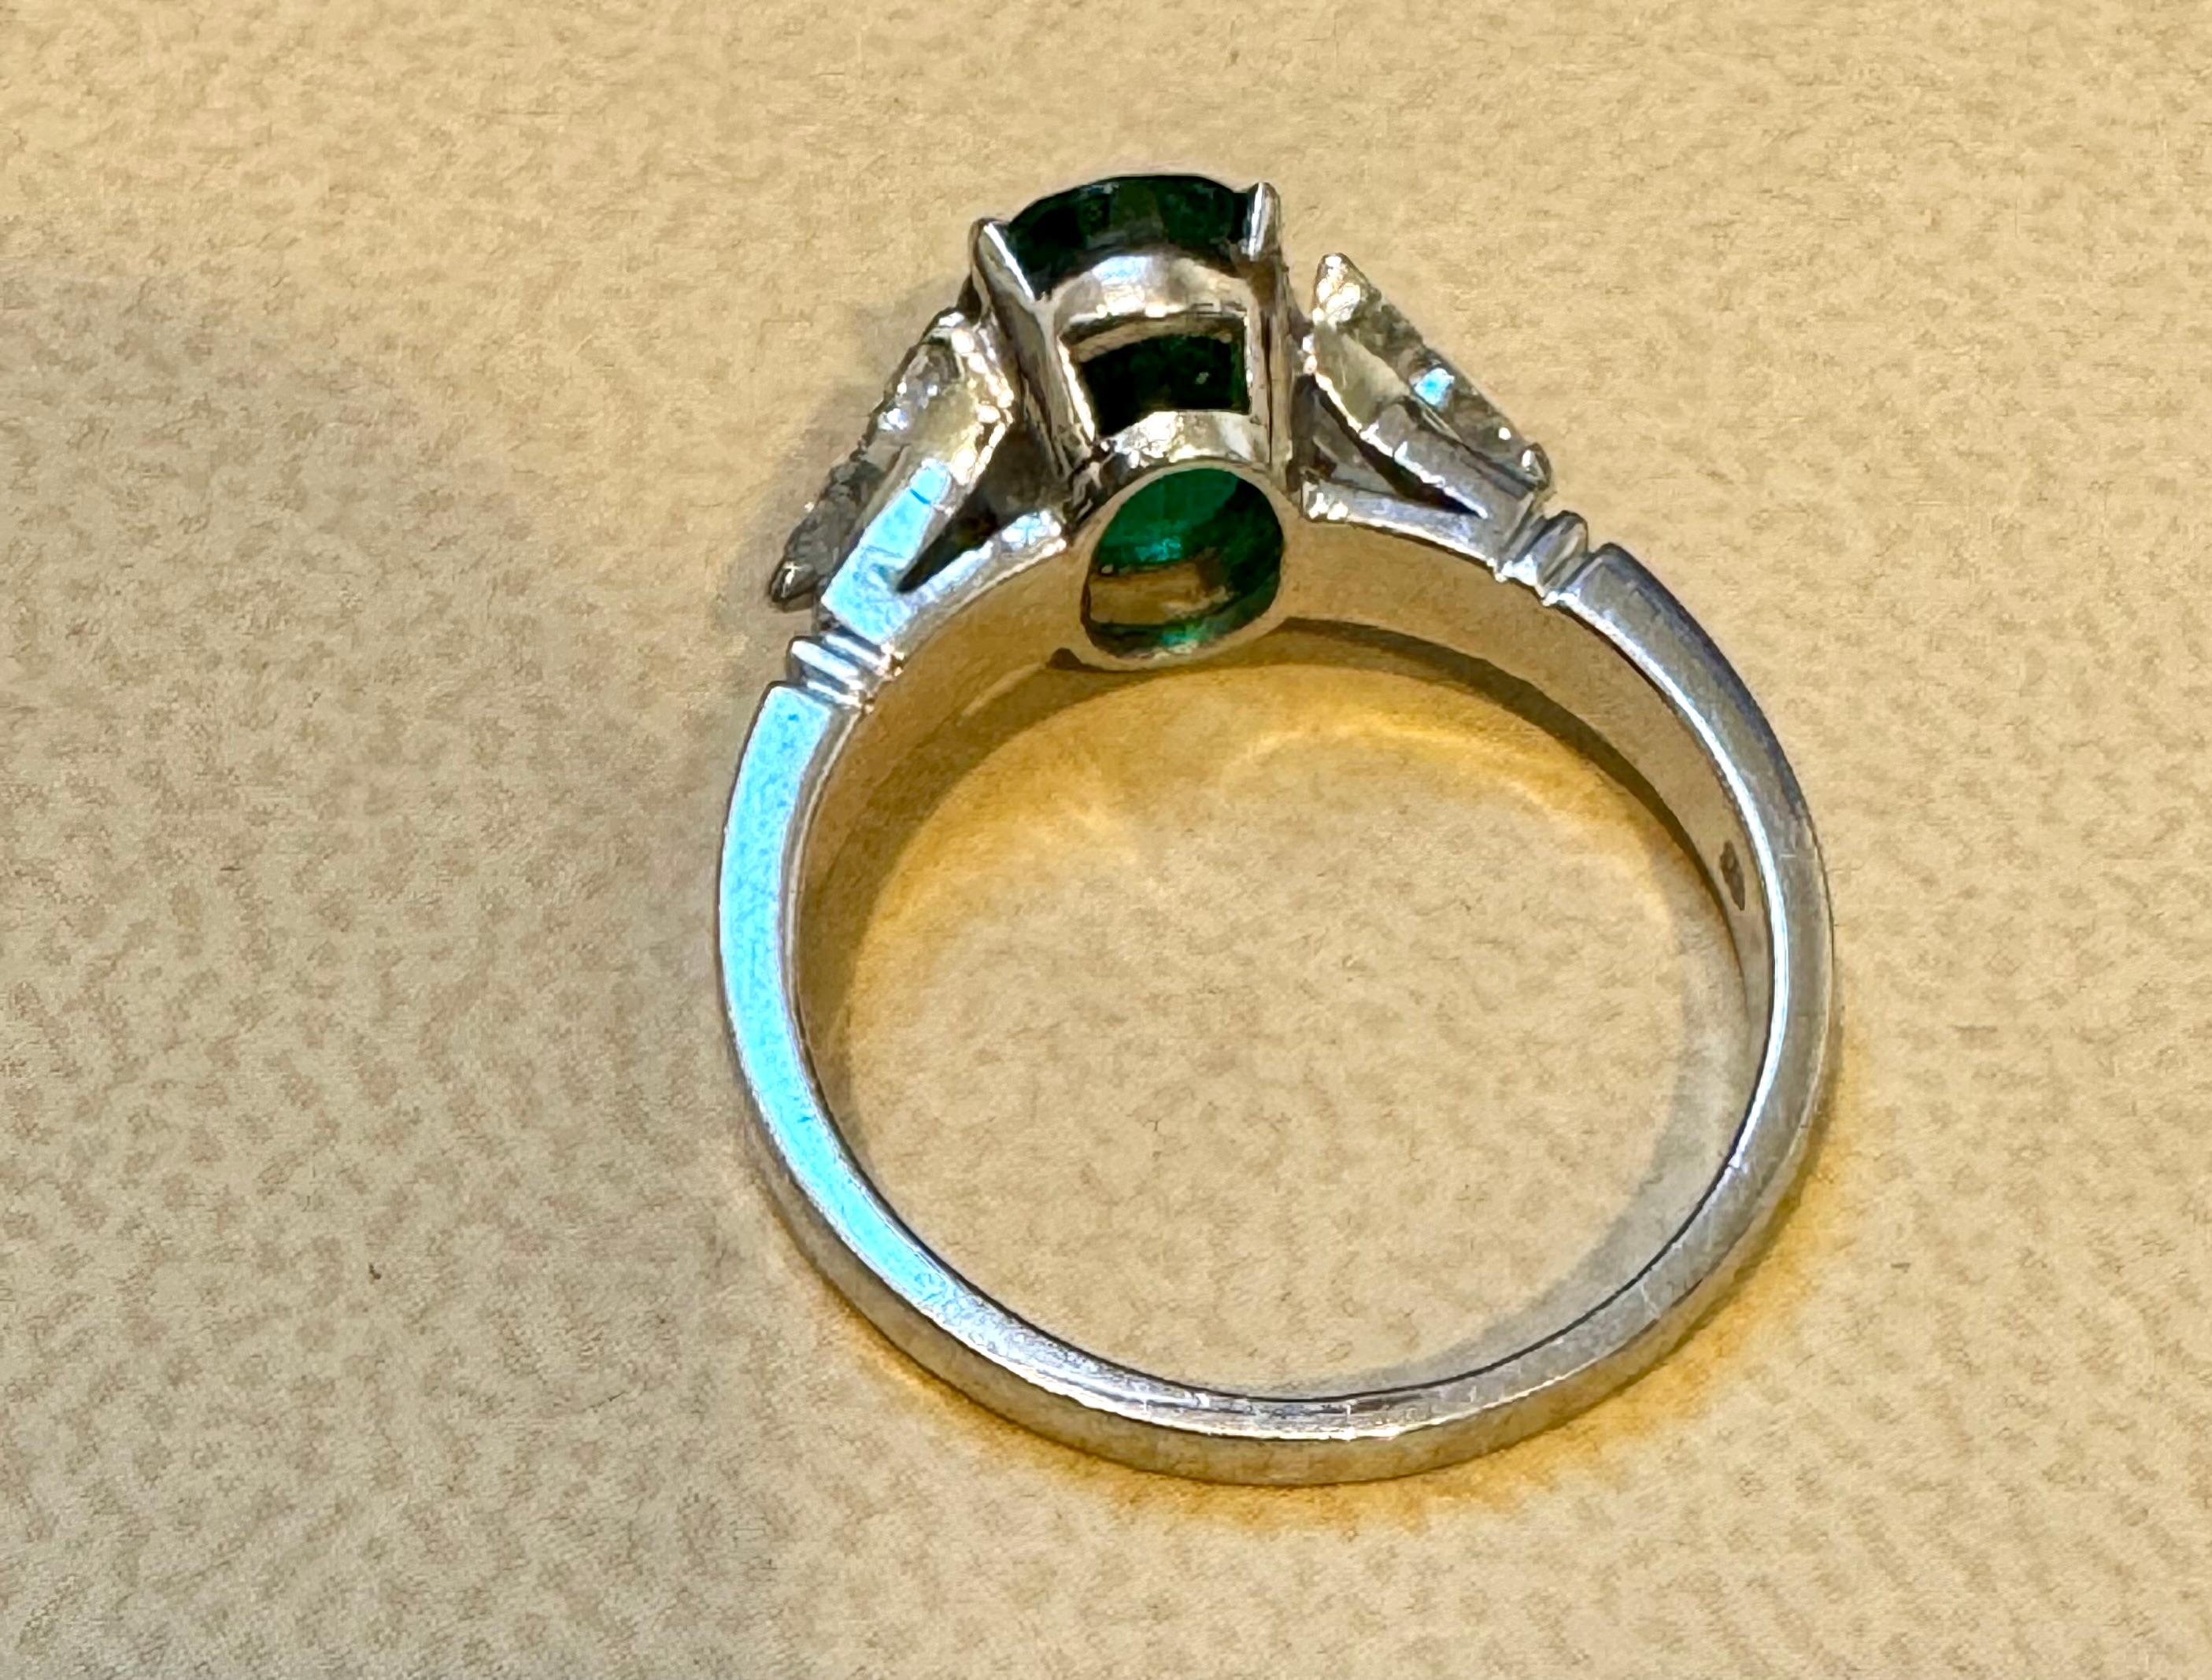 GIA Certified 2Ct Fine Zambian Emerald & 1.5 Ct Total Trillion Diamond Ring plat In Excellent Condition For Sale In New York, NY